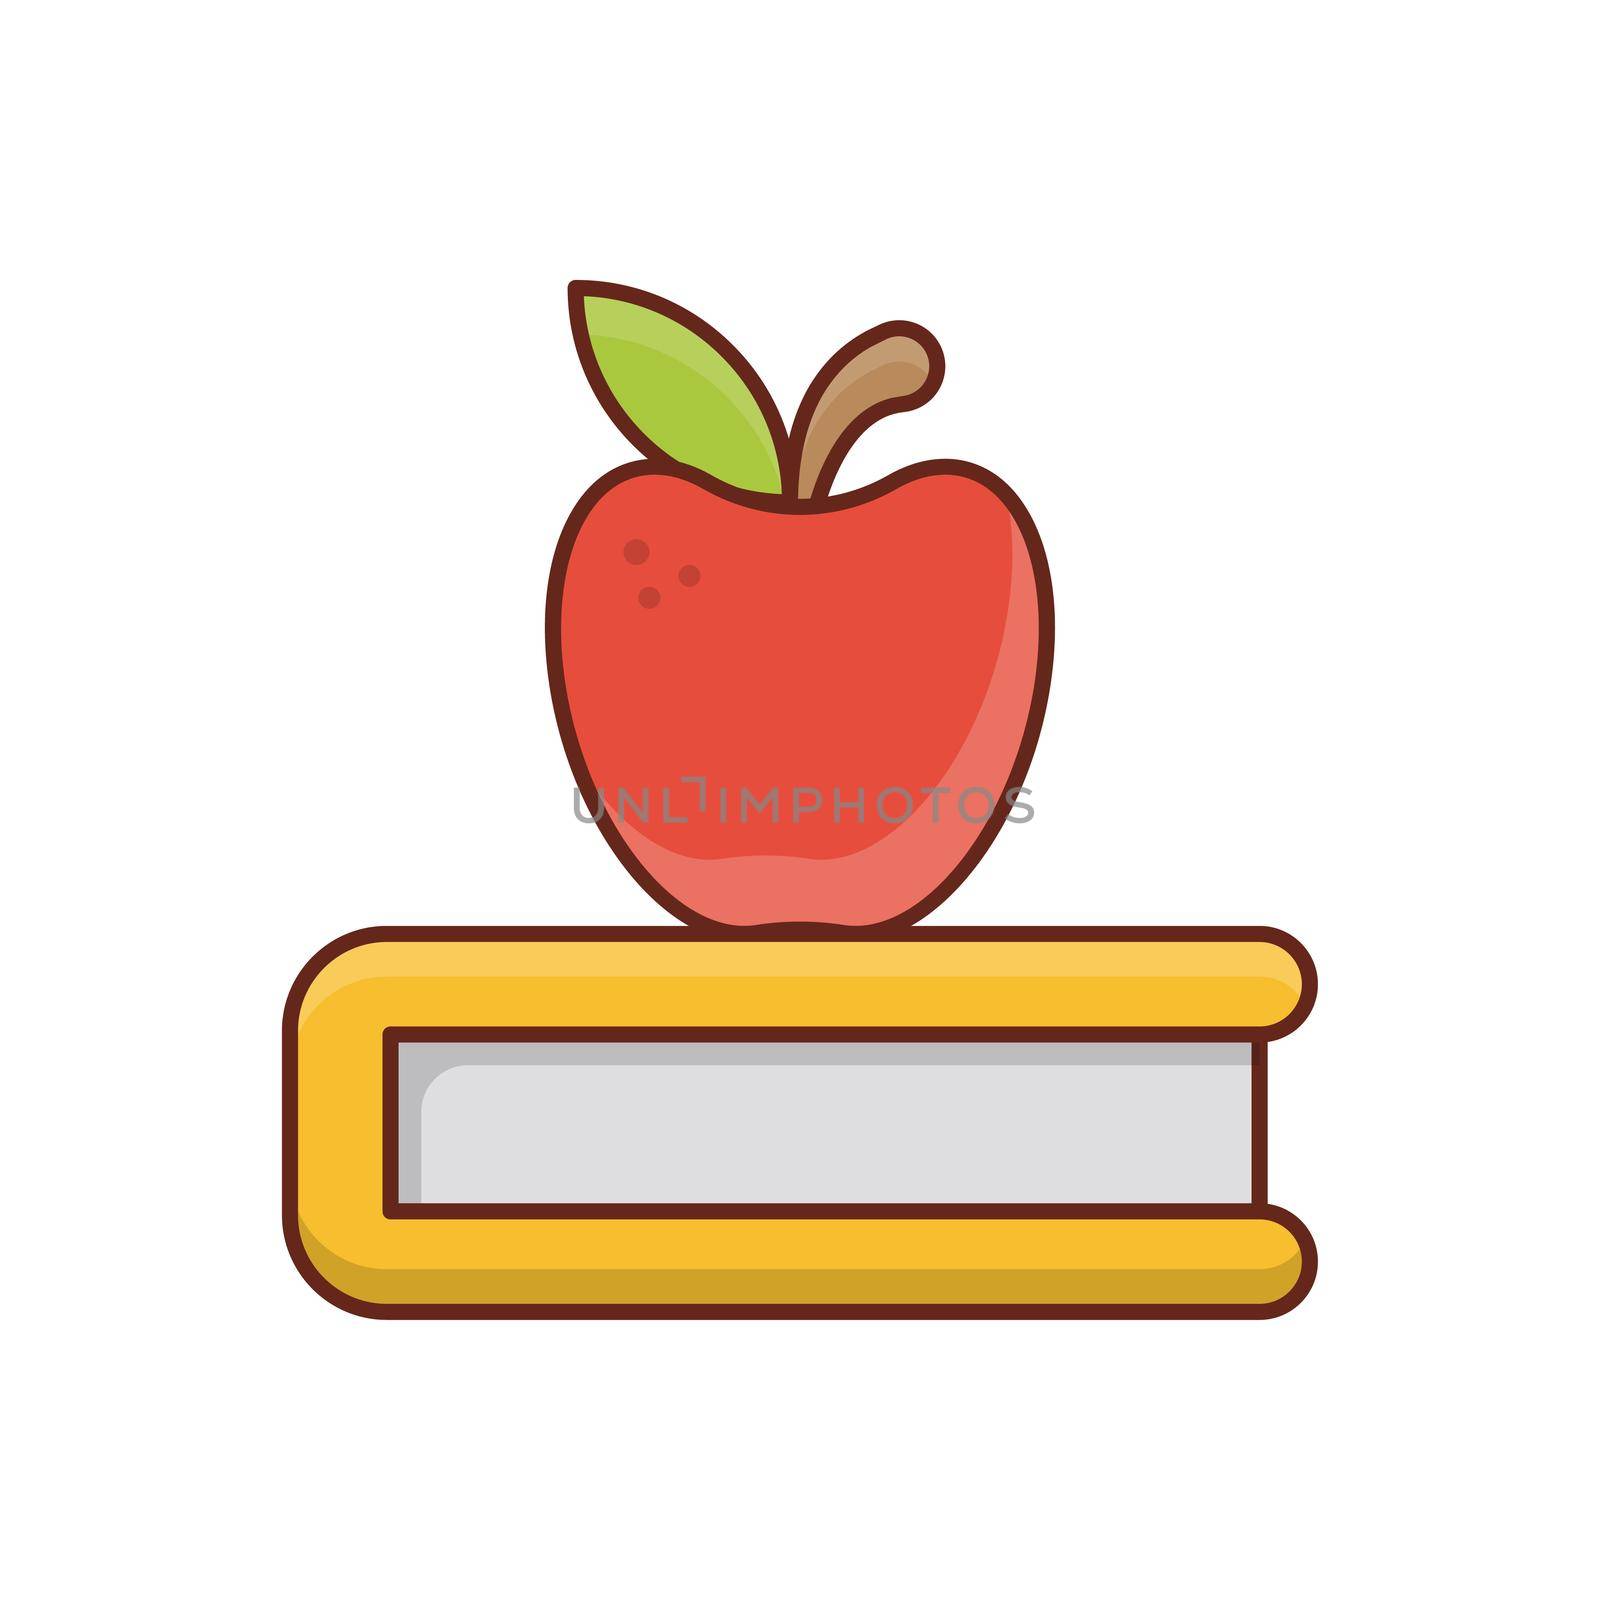 knowledge by FlaticonsDesign